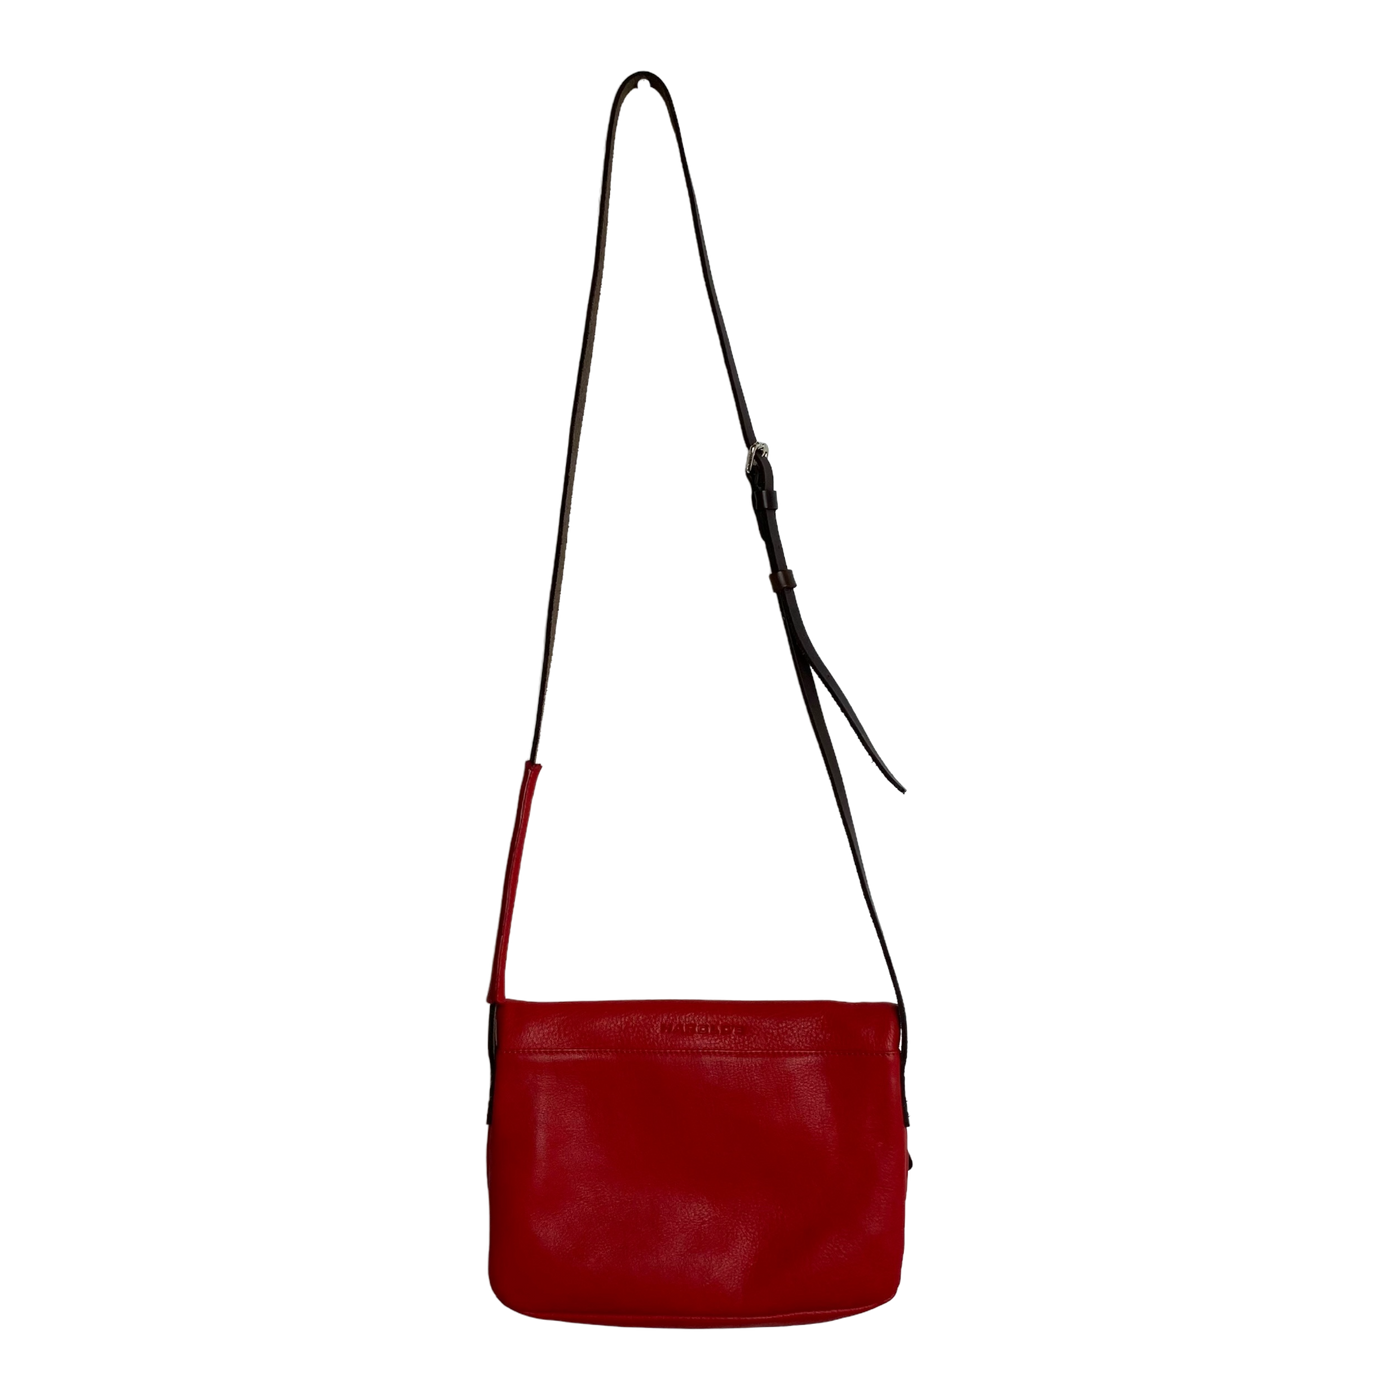 Harold's Bags leather chaza twosize handbag, red